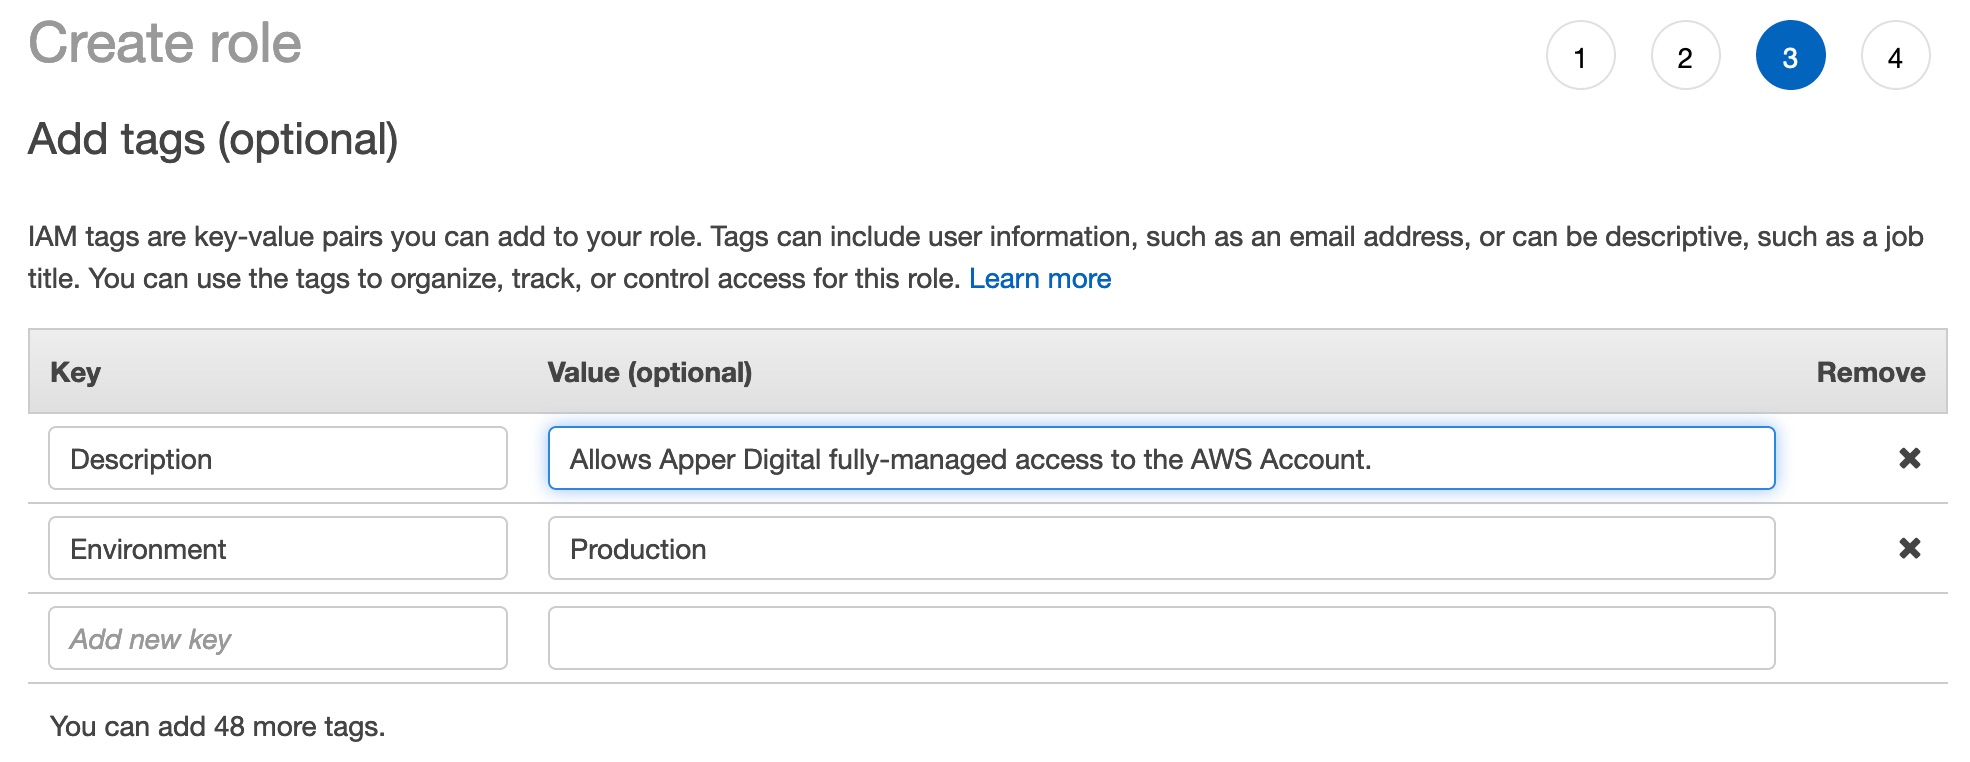 Allowing a 3rd Party to Access Your AWS Account